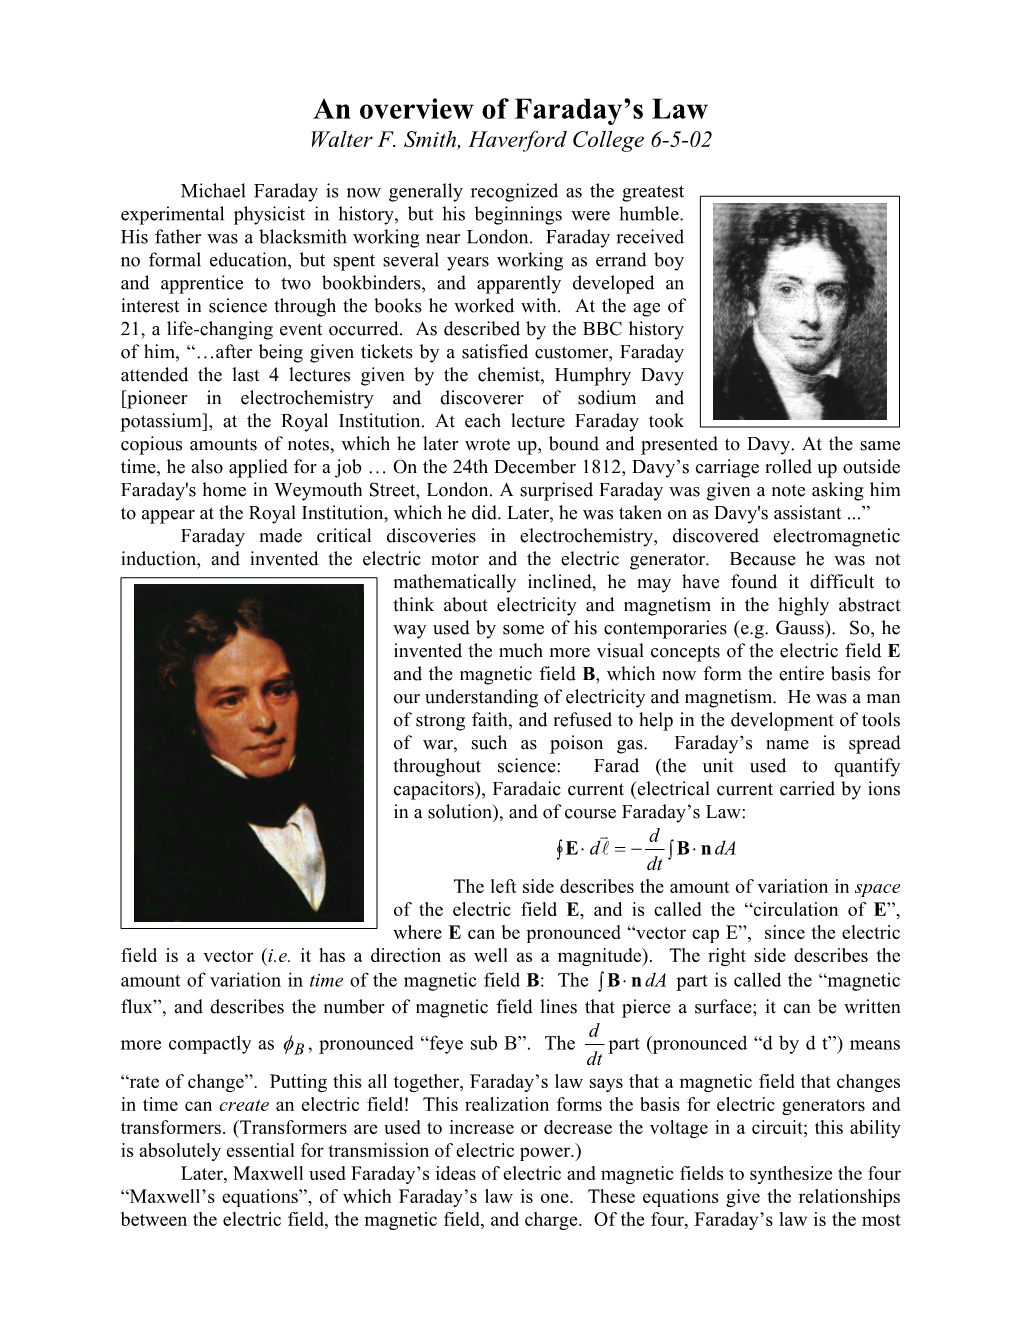 An Overview of Faraday's